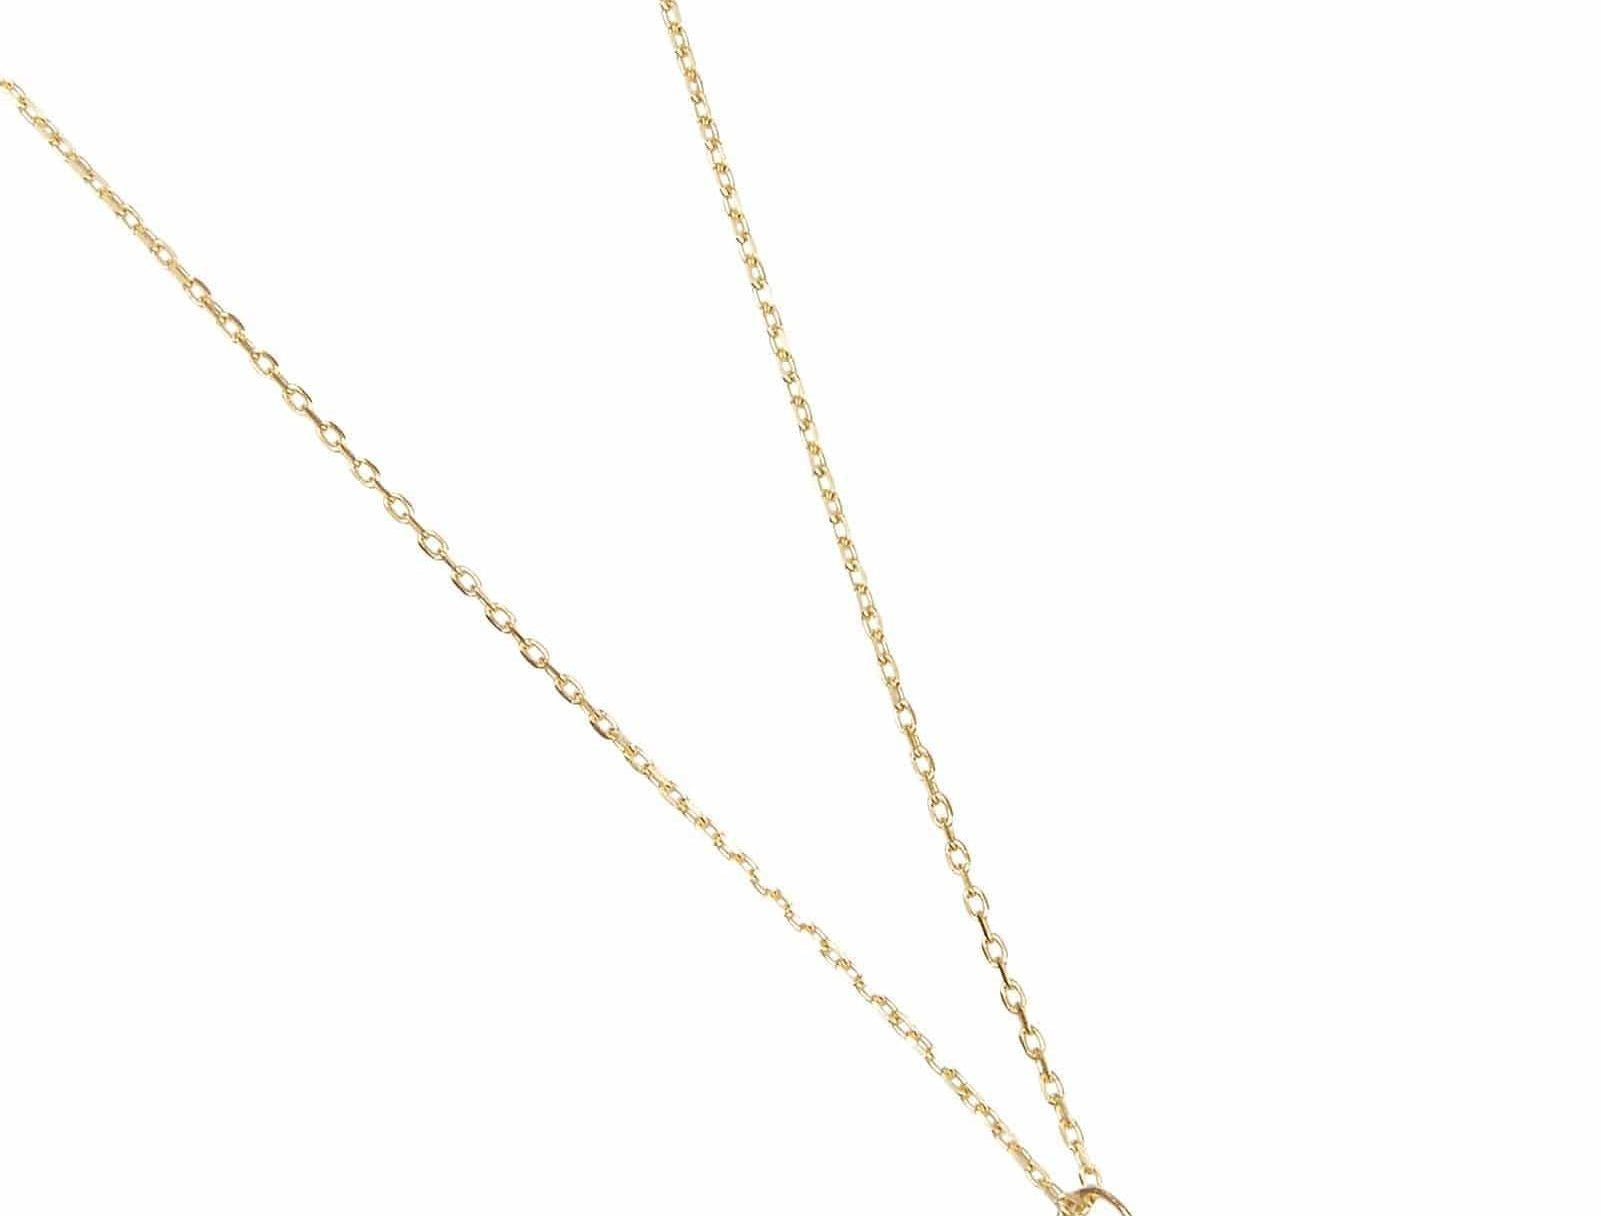 Picture of Luna Rae Solid 9k Gold Moonglade Necklace